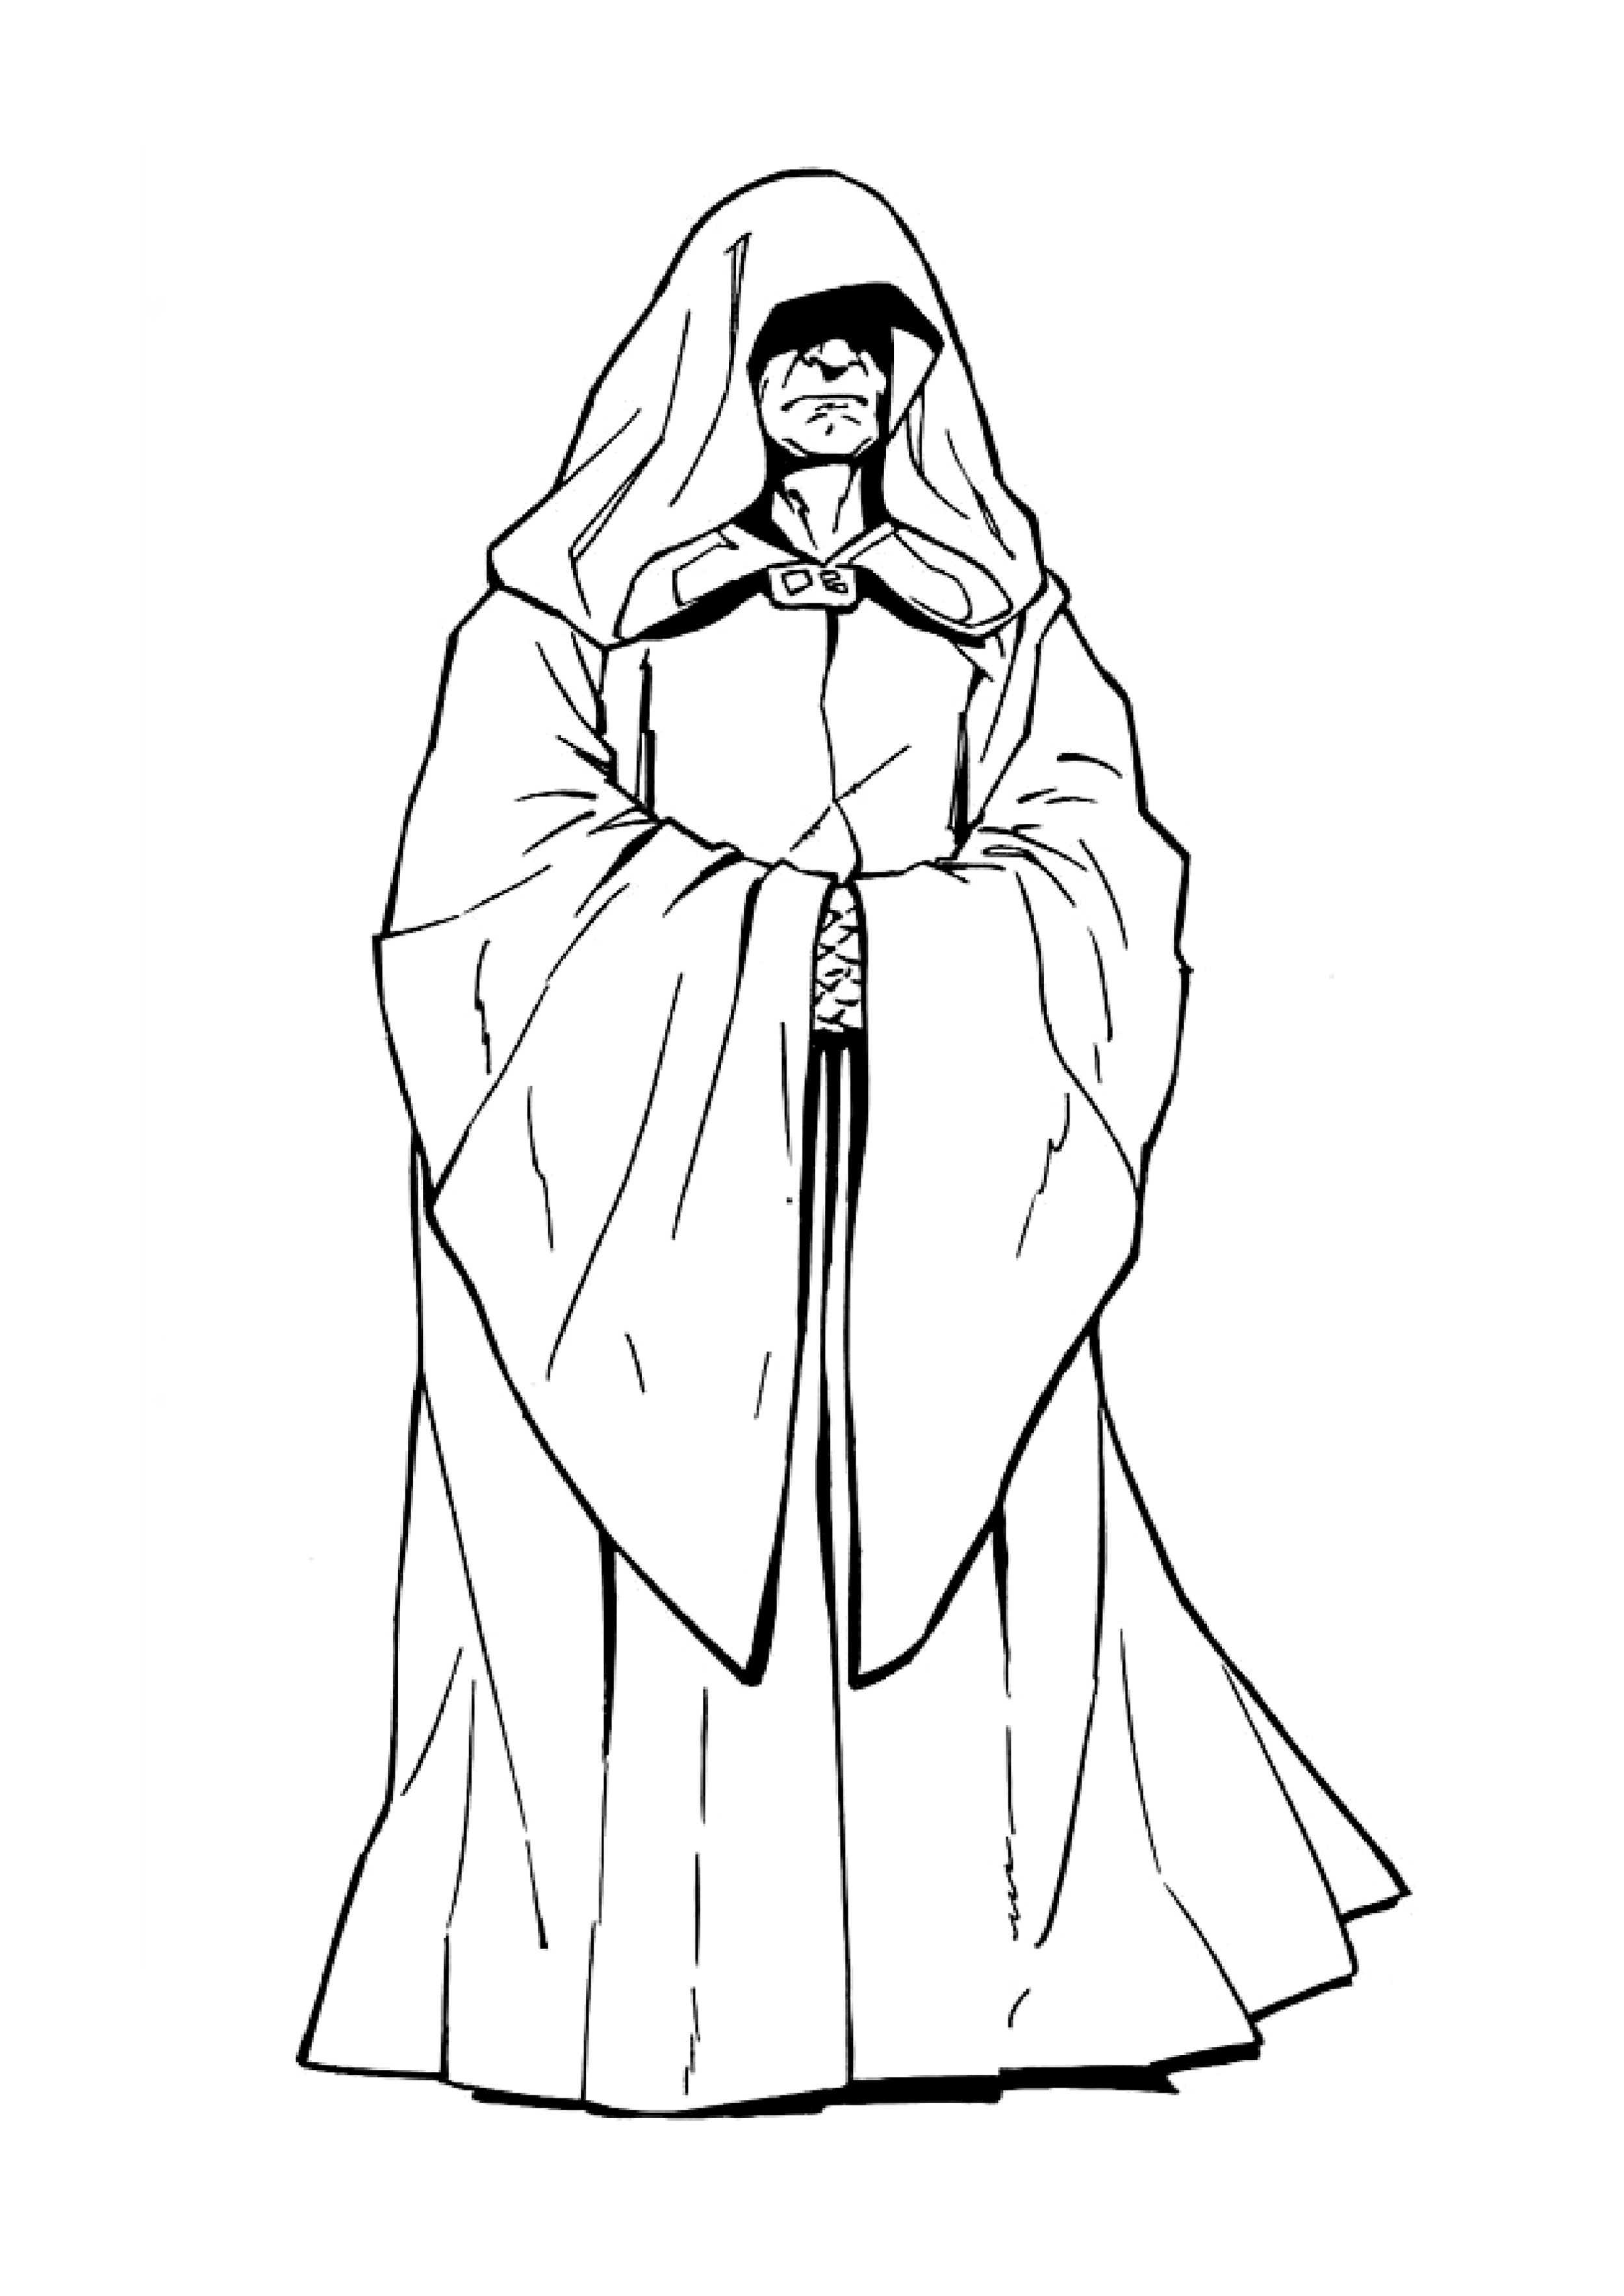 Star Wars coloring page to print and color